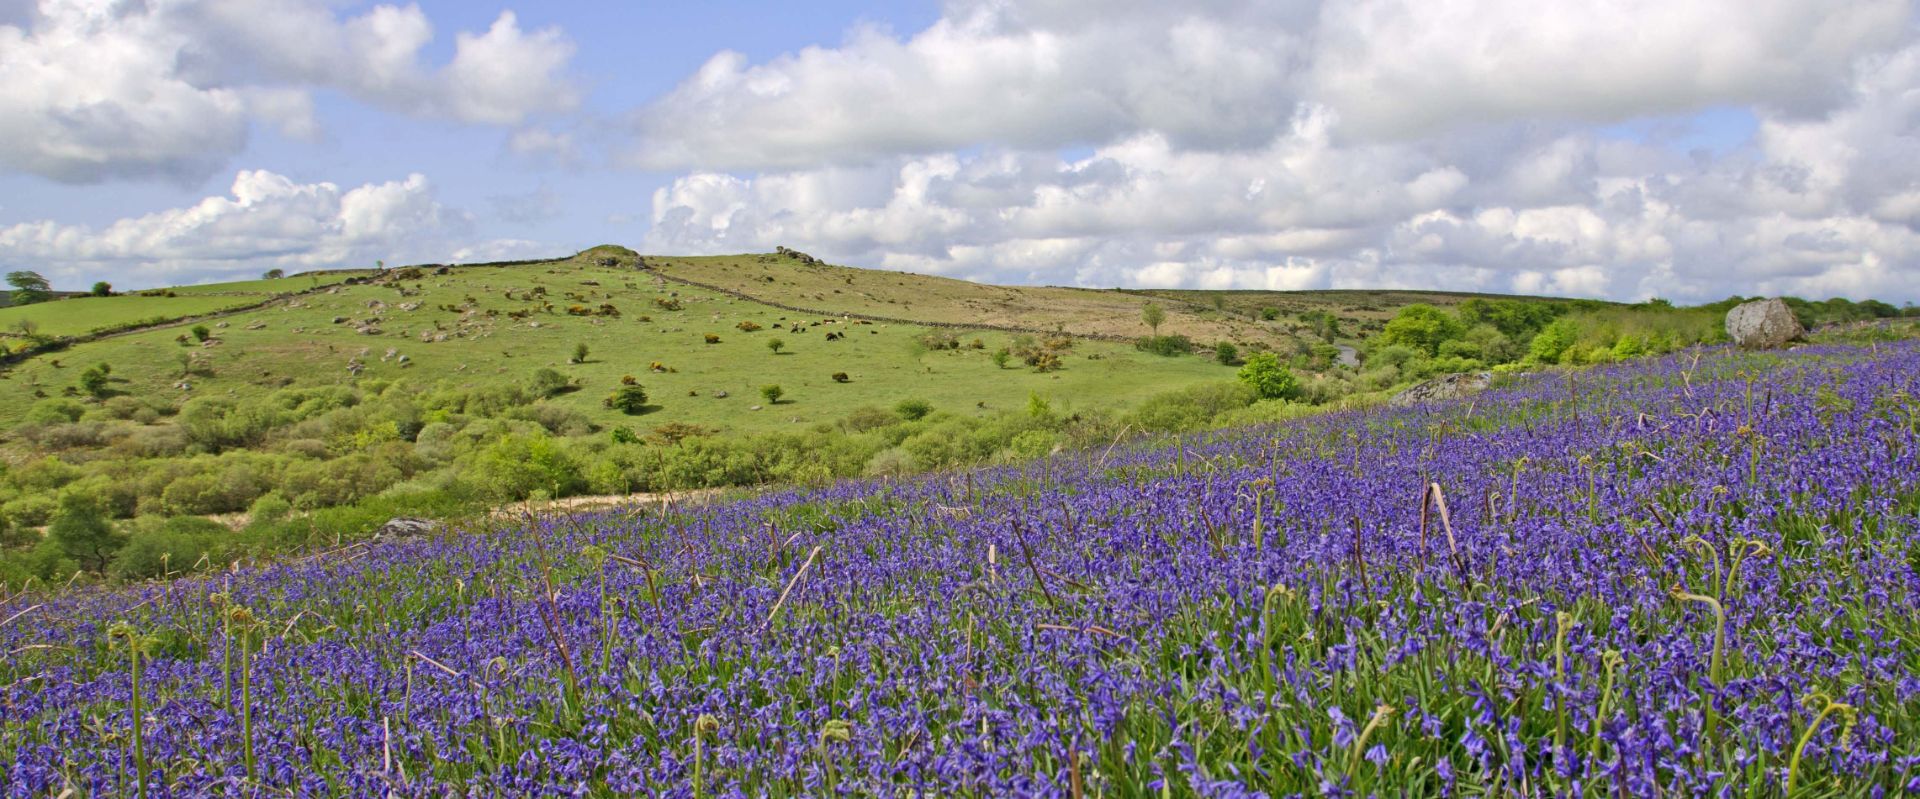 Bluebells at Holwell Lawn on Dartmoor